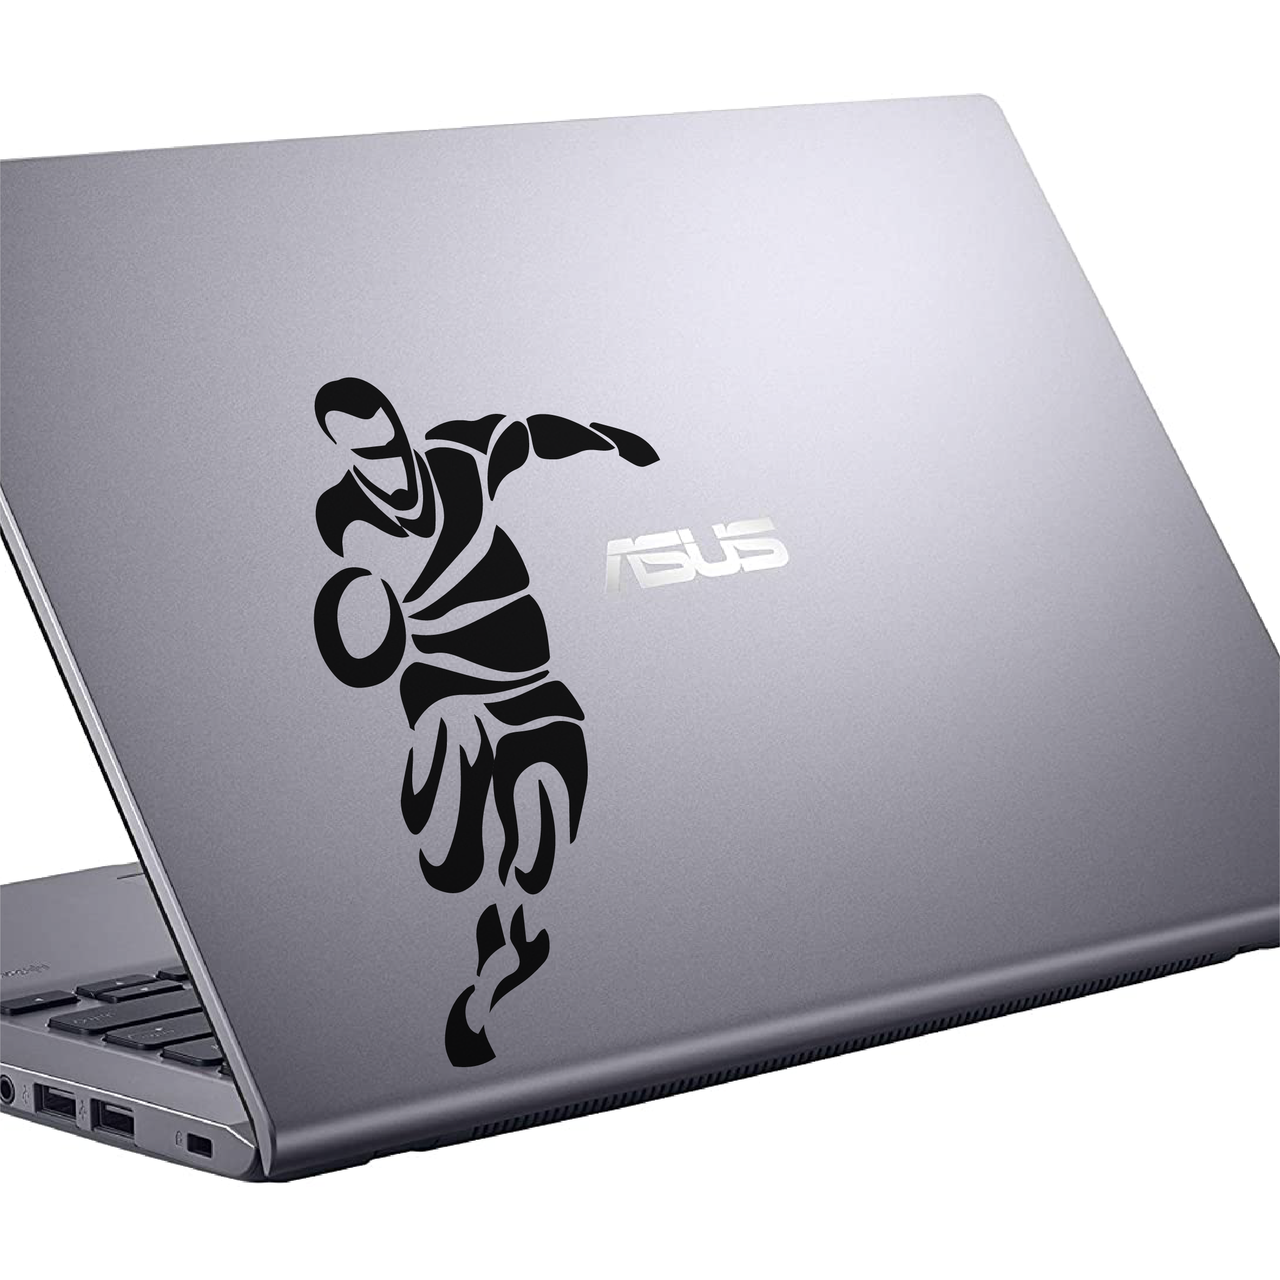 Rugby Laptop Decal